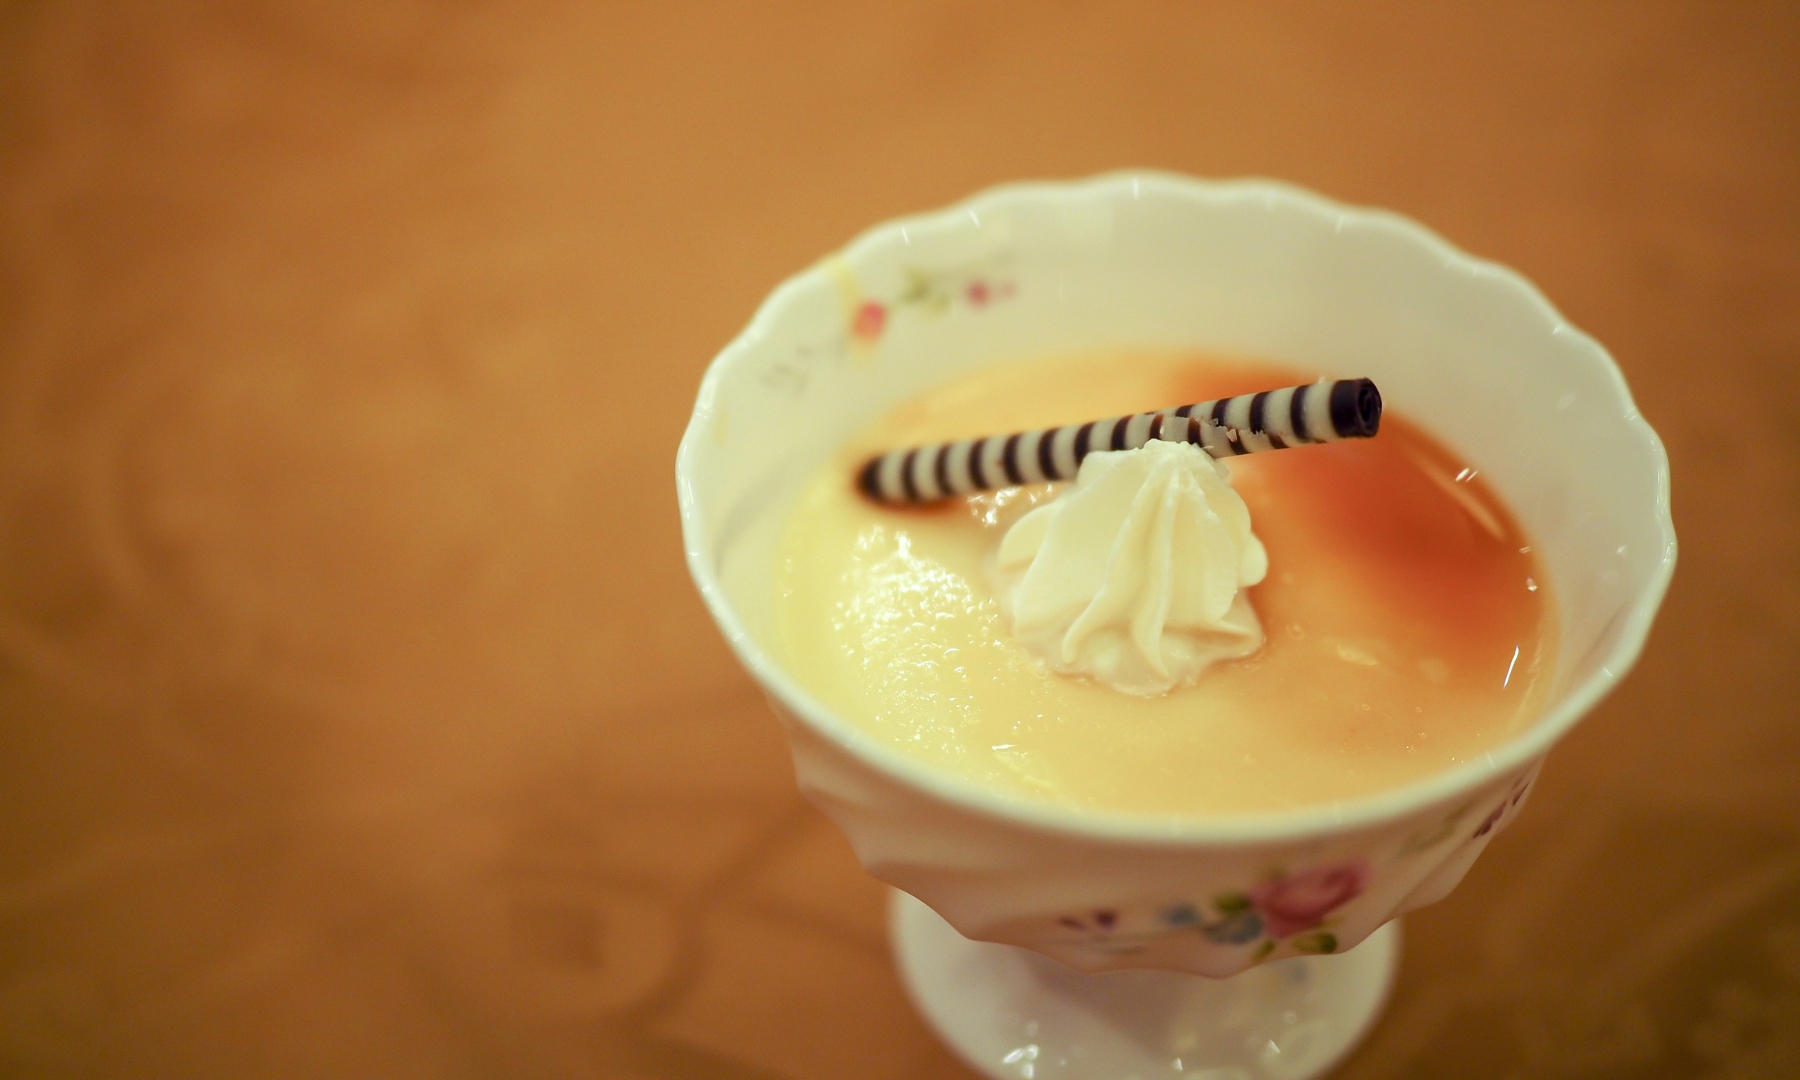 Japanese purin in a bowl